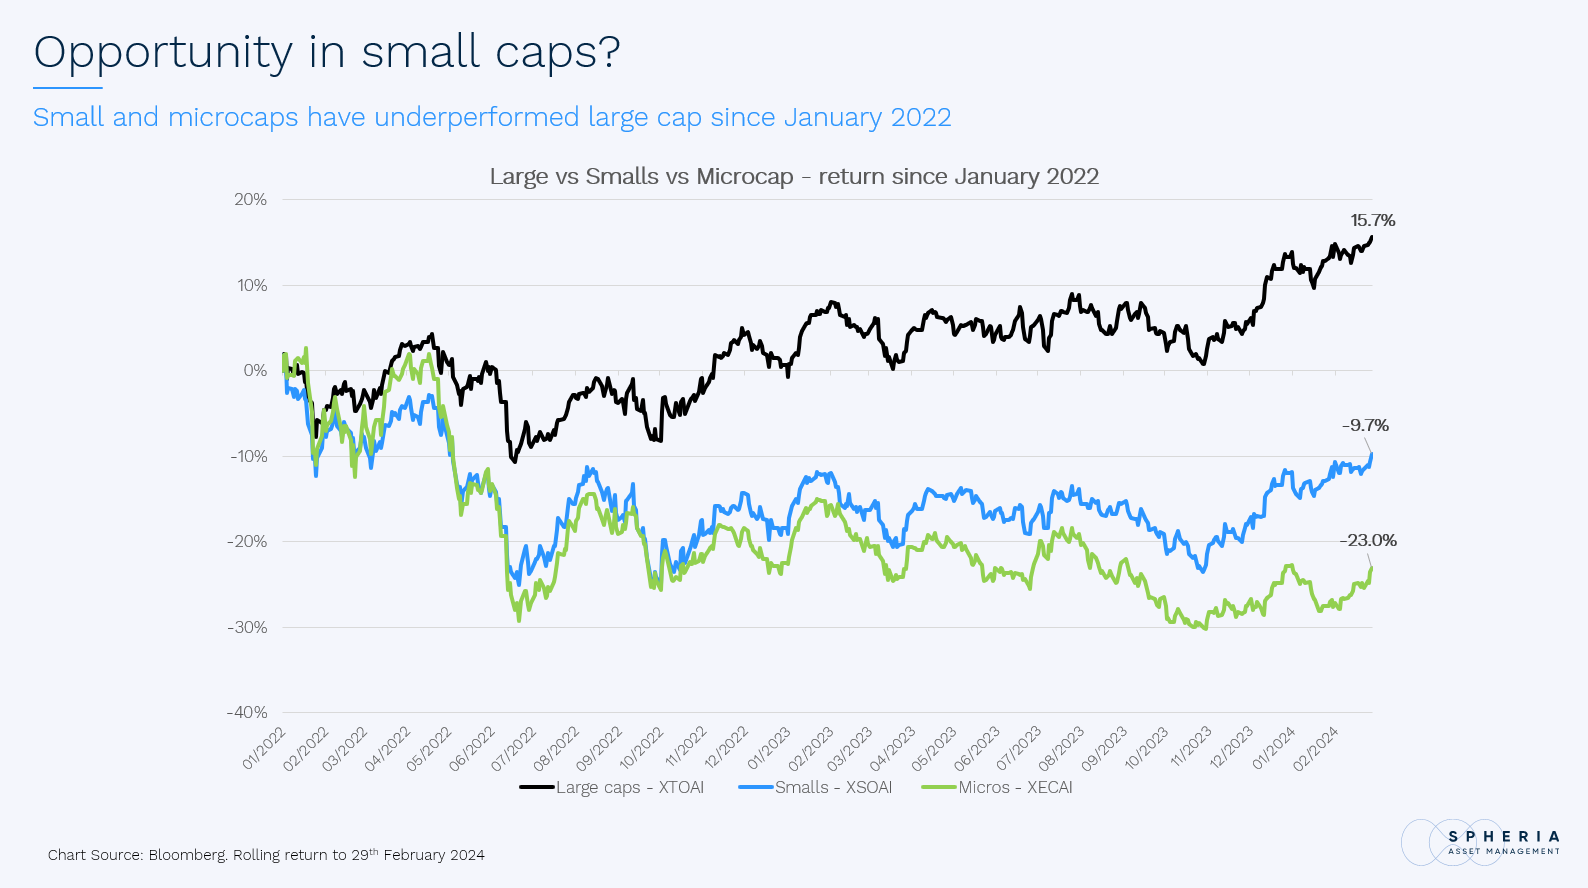 Image: Small and microcaps have underperformed large caps since January 2022